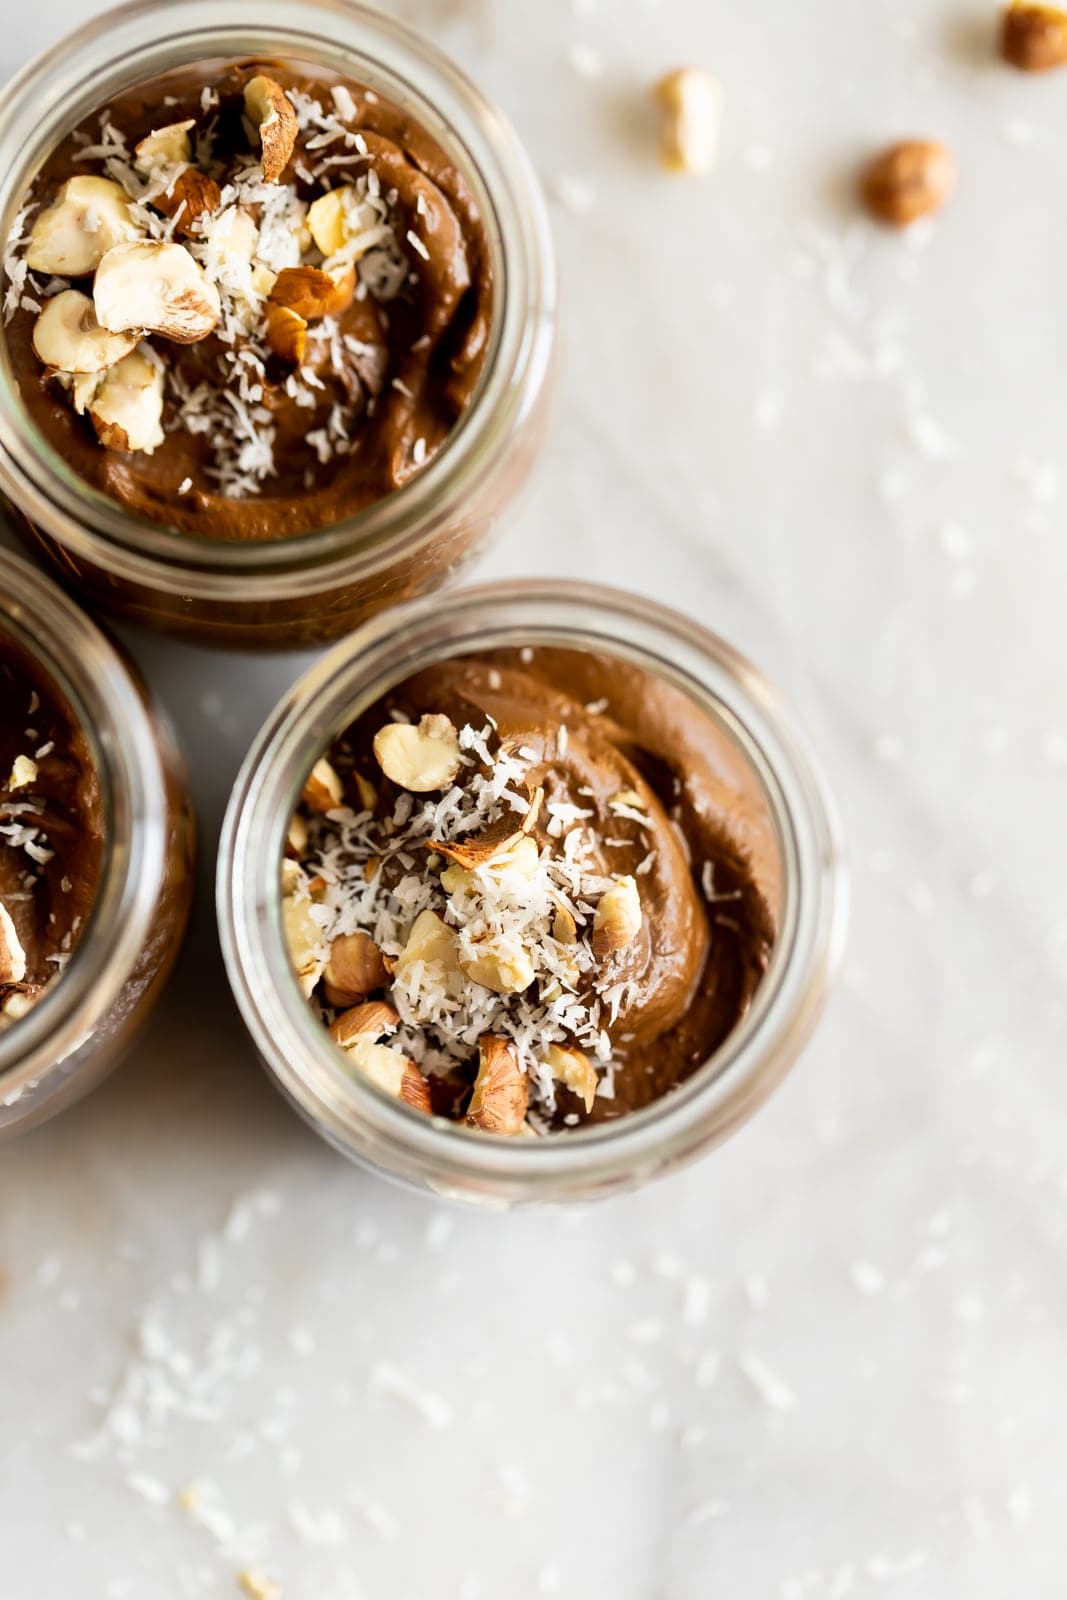 A creamy dairy-free avocado chocolate mousse made with just 5 ingredients then topped with coconut flakes and chopped hazelnuts!